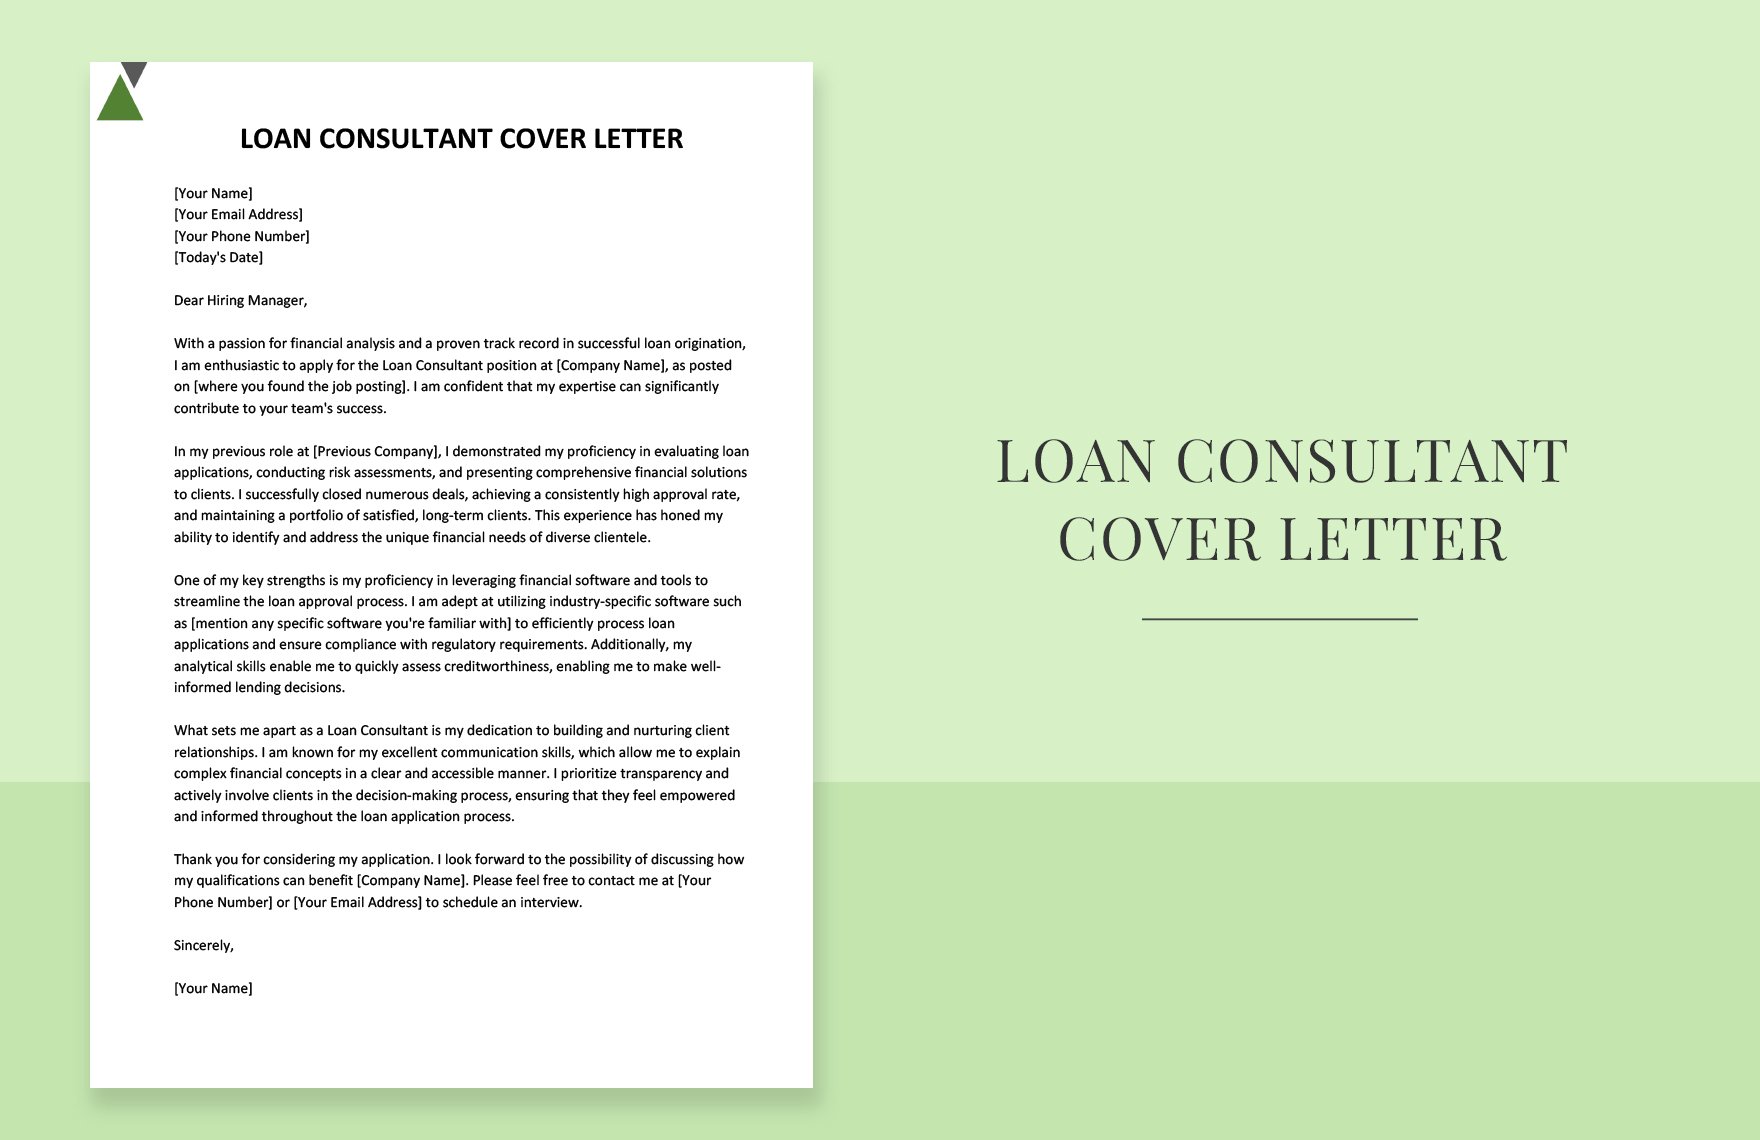 loan-consultant-cover-letter